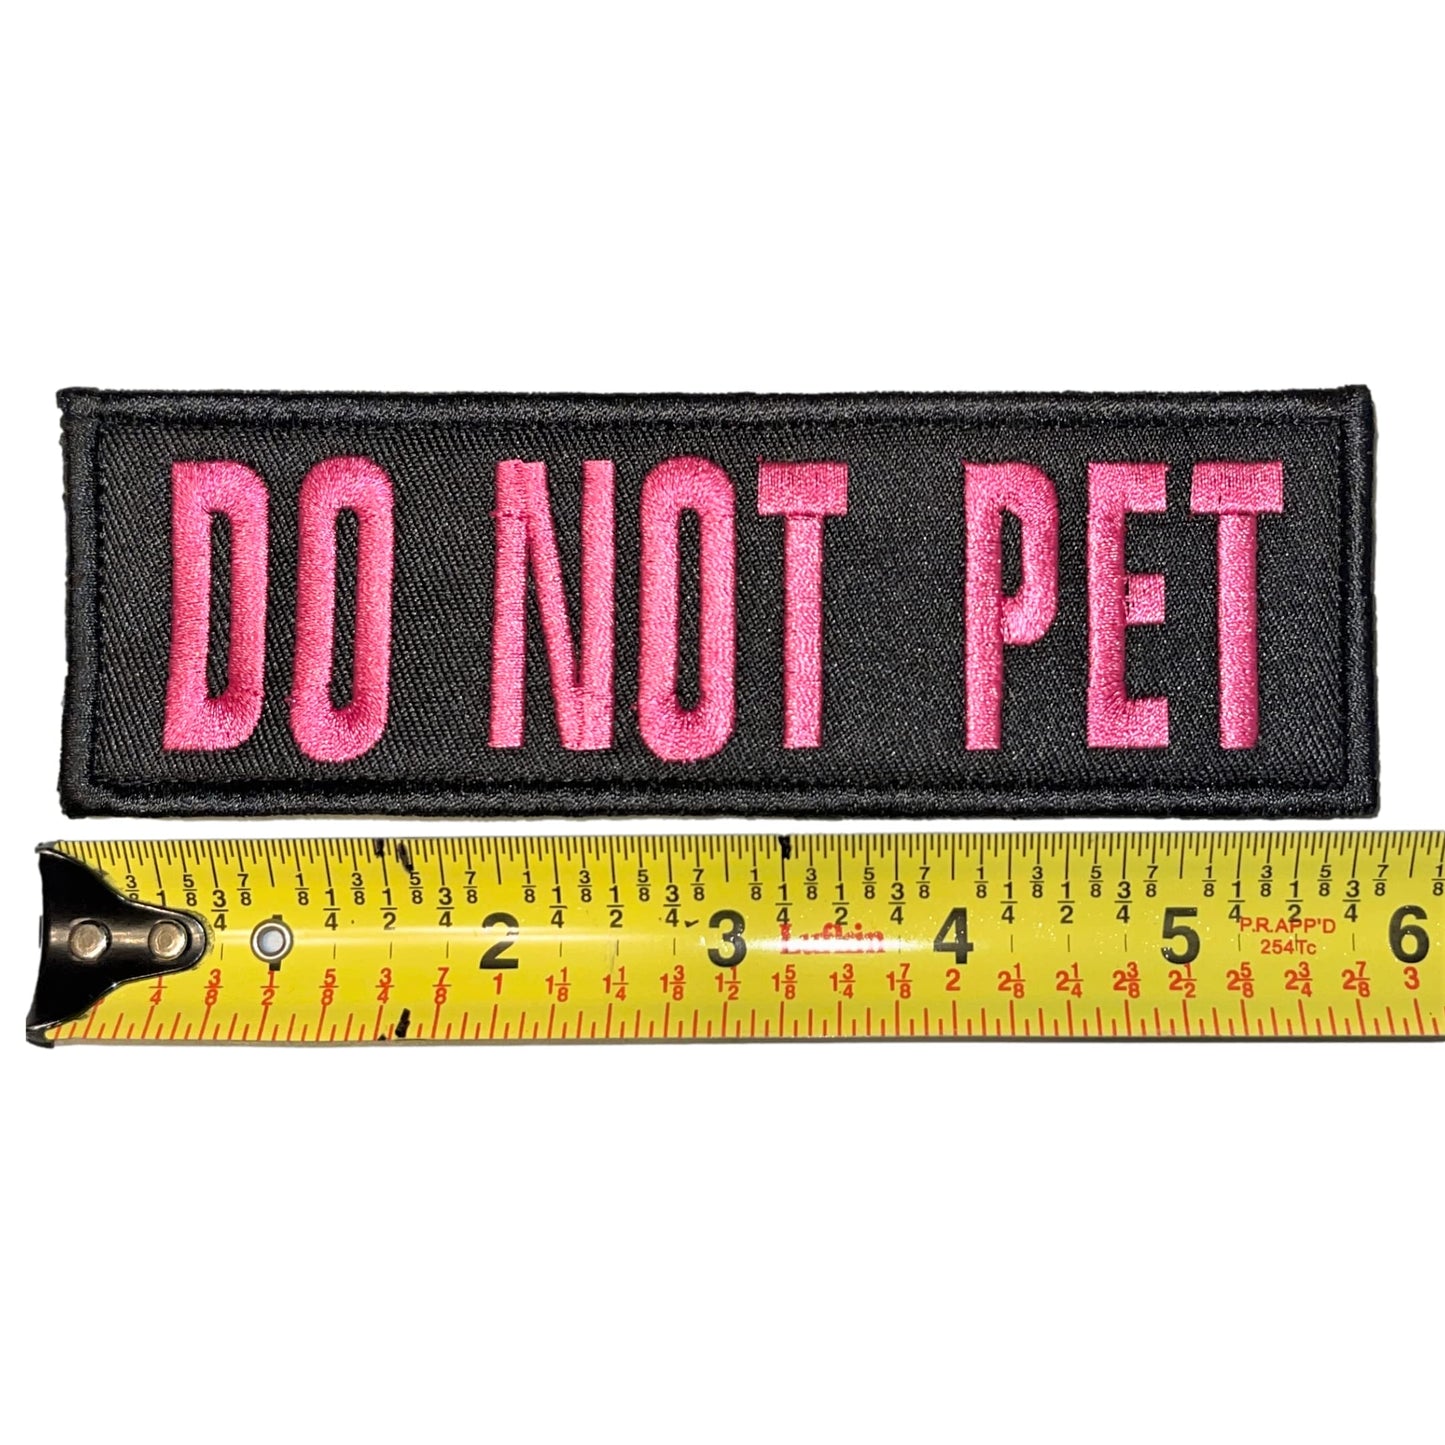 Service Dog Collar Vest Patches - 2 X 6 Inch Embroidered - Hook & Loop - Service Dog Patch - in Training Dog Patch - Do Not Pet Patch - SAR ESA K9 Emotional Support Dog Vest Or Therapy Dogs